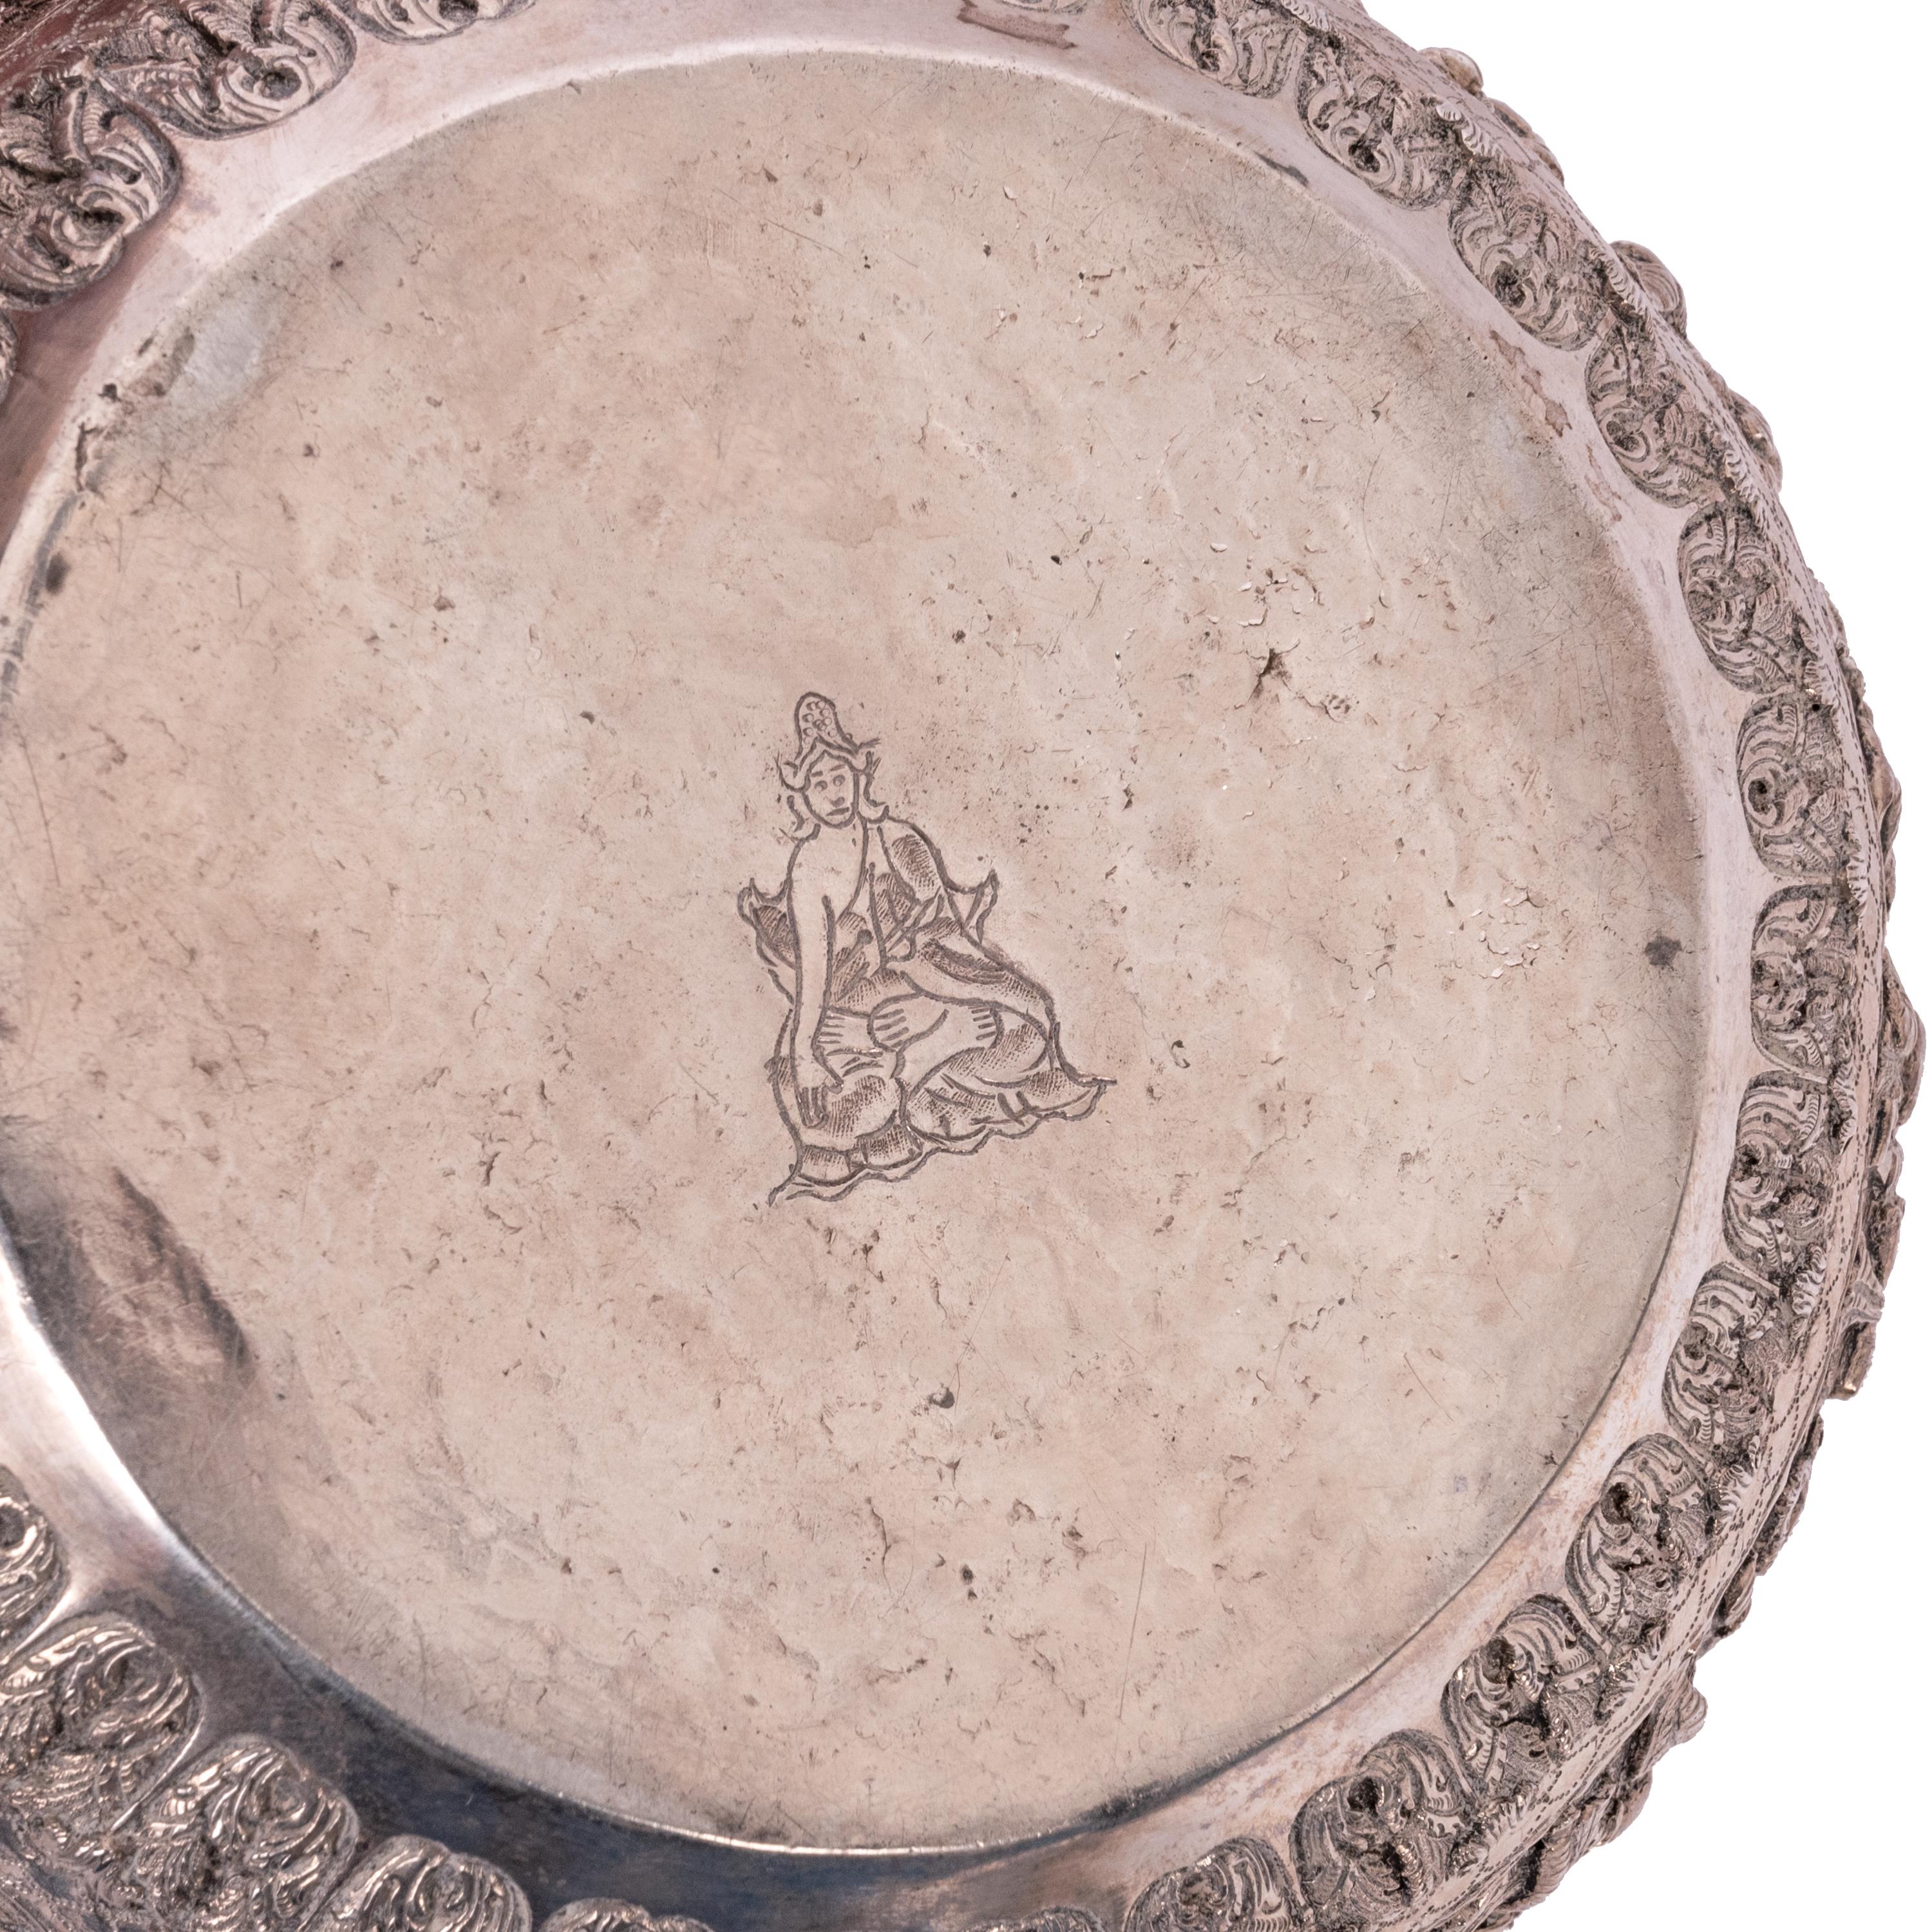 Antique Burmese Repousse Silver Buddhist Thabeik Offering Bowl Guanyin Mark 1890 For Sale 2